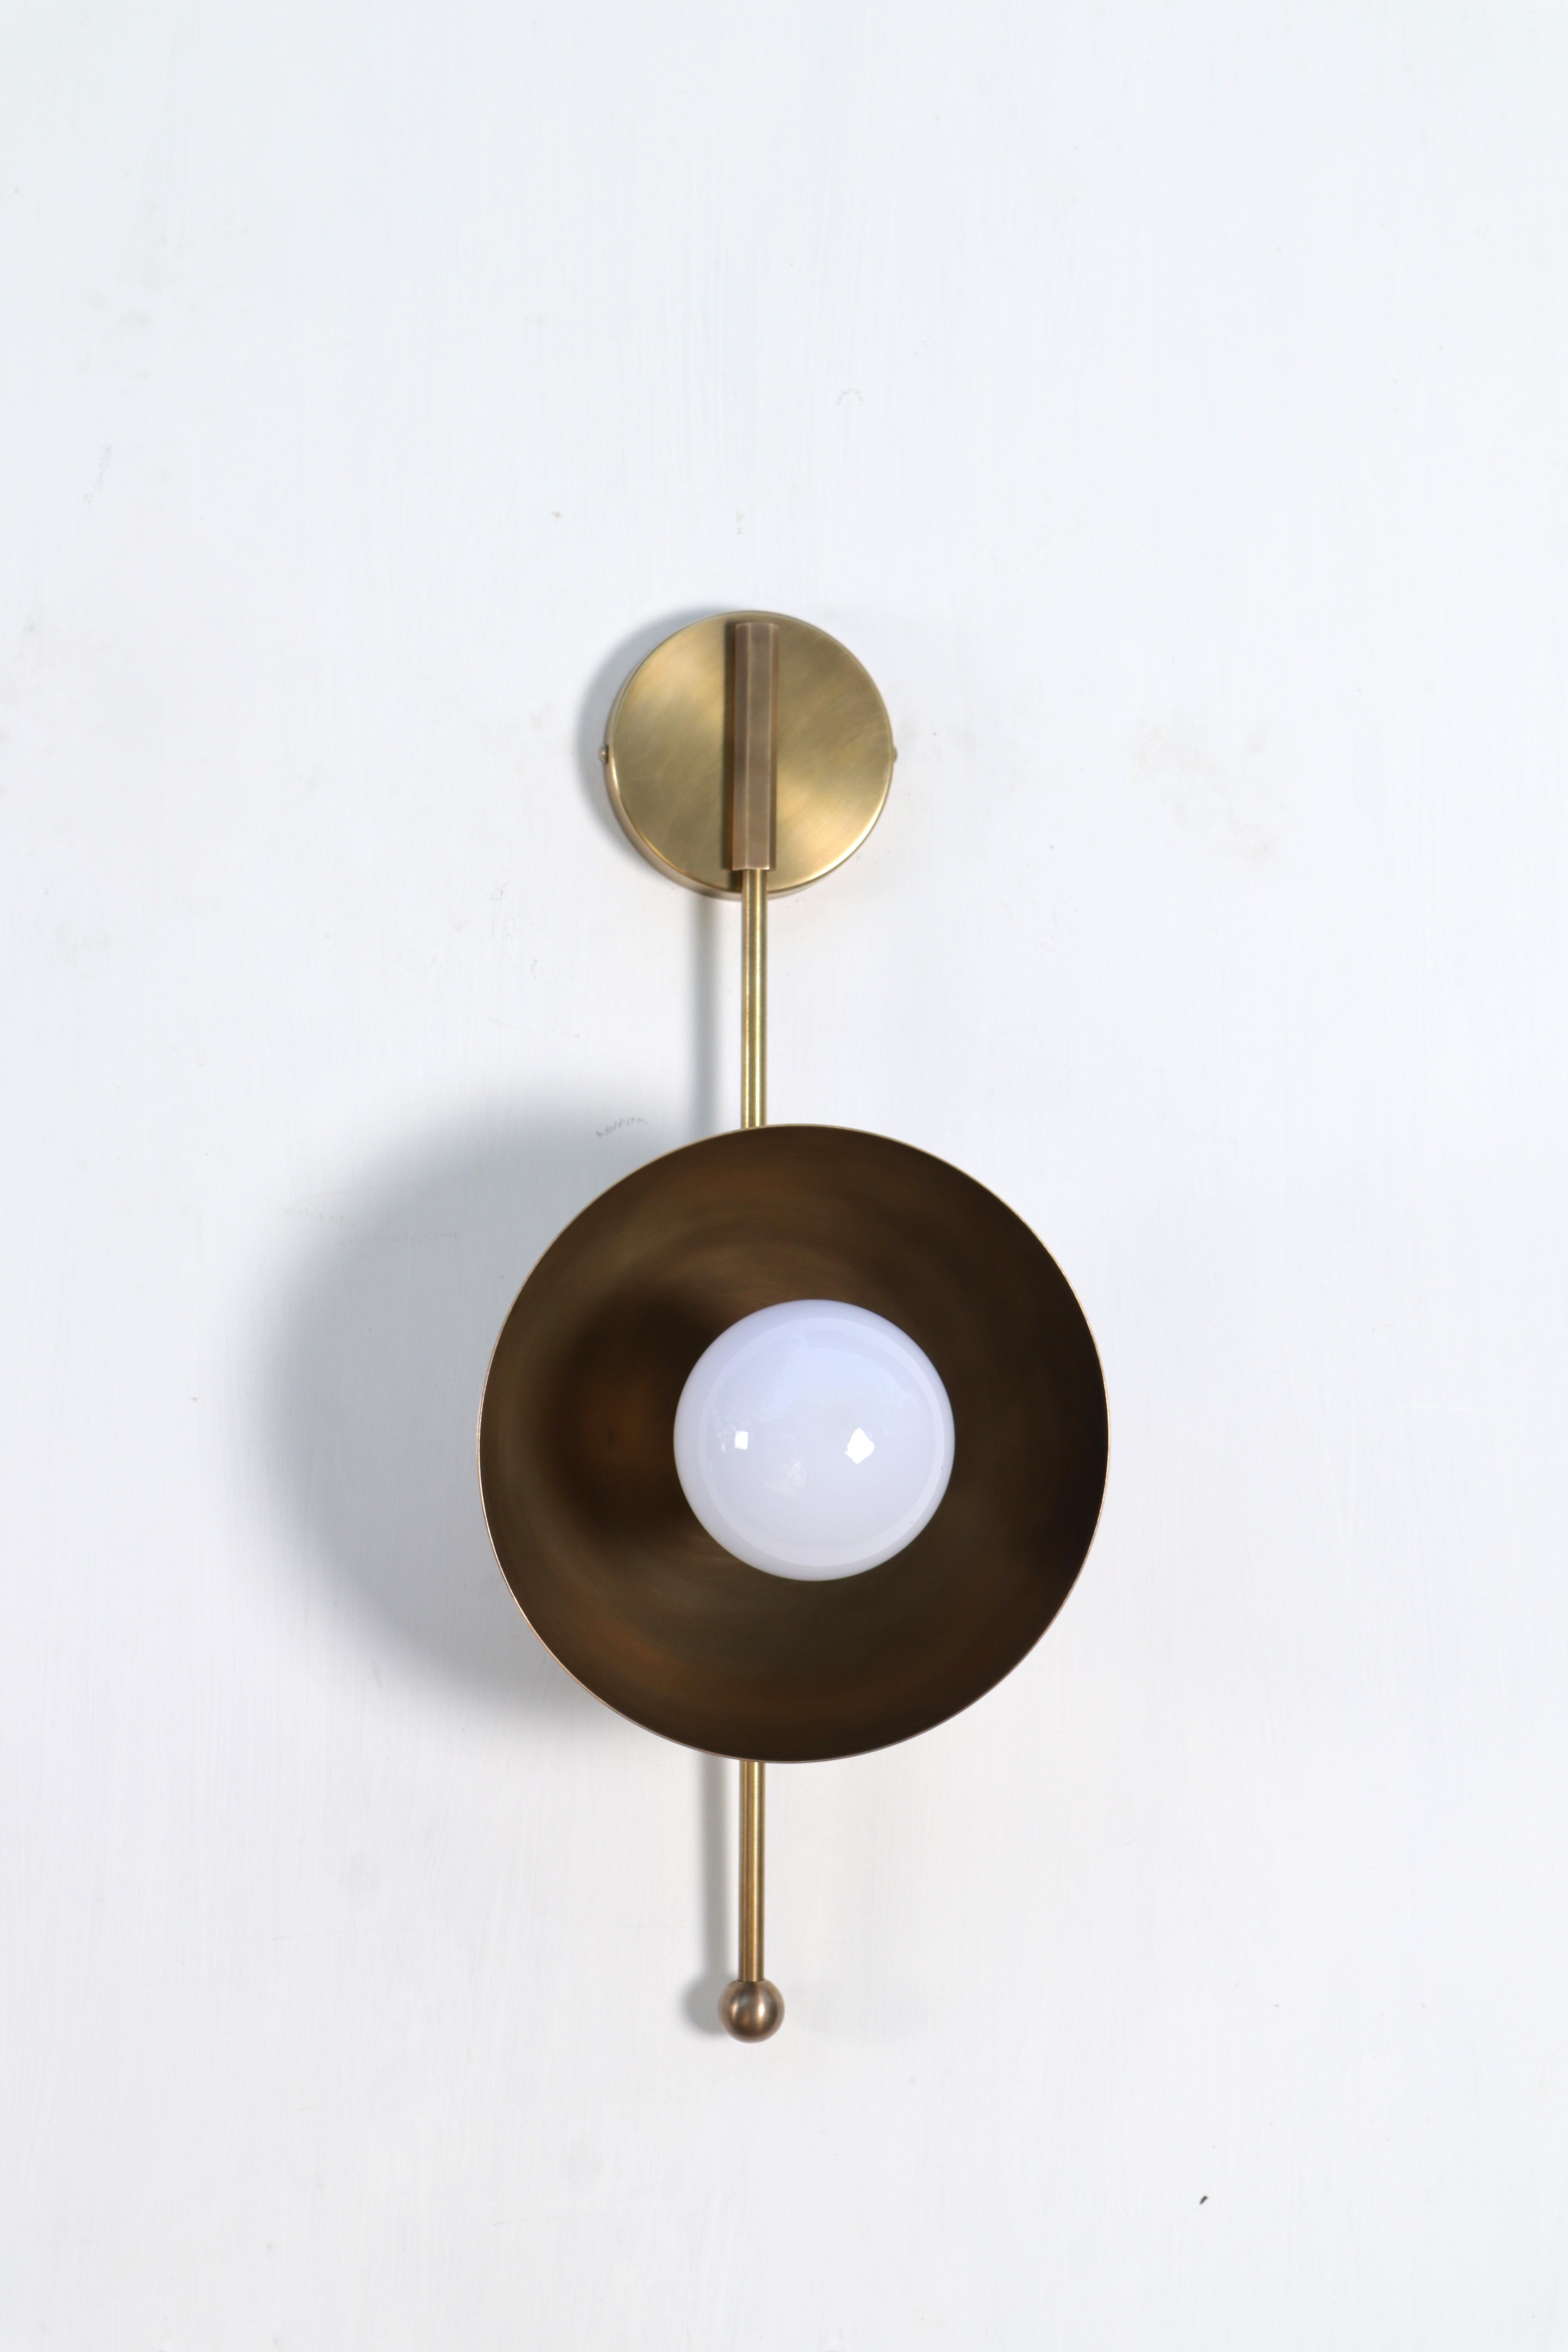 Drop Brass Wall Sconce Two by Lamp Shaper
Dimensions: D 23 x W 18 x H 51 cm.
Materials: Brass.
--Different finishes are available: raw brass, aged brass, burnt brass, and brushed brass. Please contact us.
--All our lamps can be wired according to